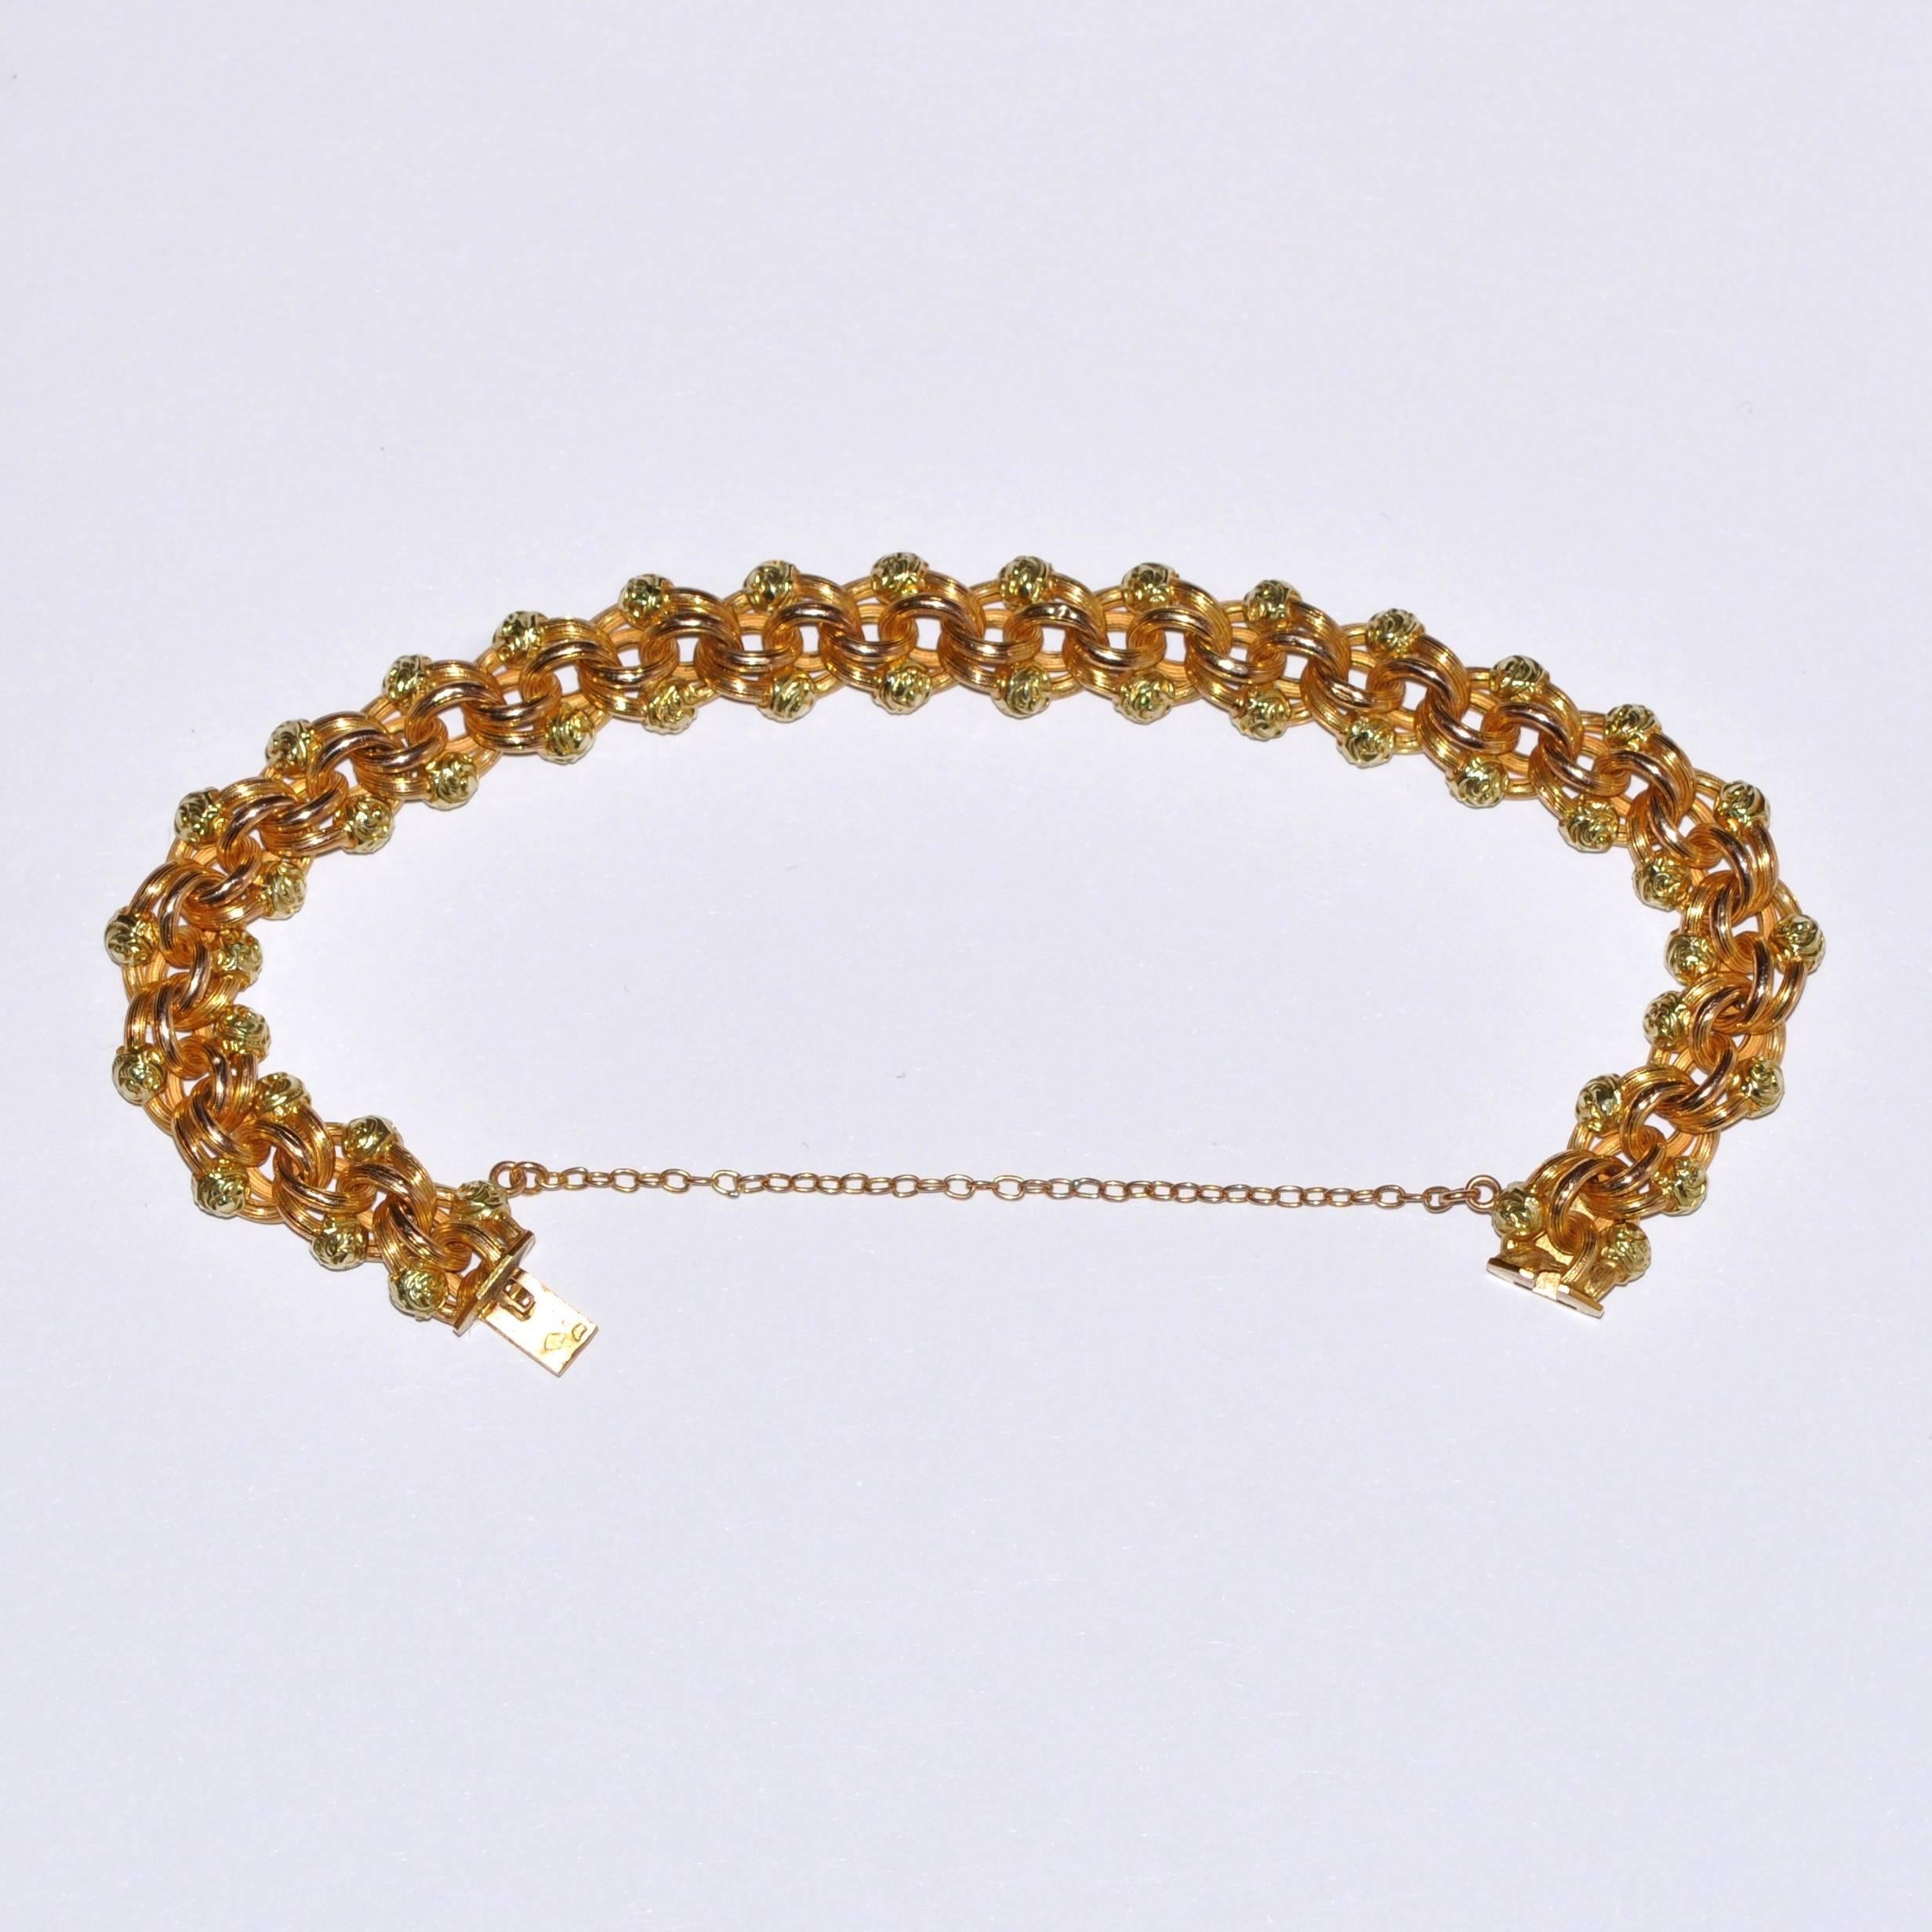 Discover this Flower Chain Yellow Gold 18 Carat Bracelet.
Yellow Gold 18 Carat Flower decor
Security Chain 
Yellow Gold Clasp
